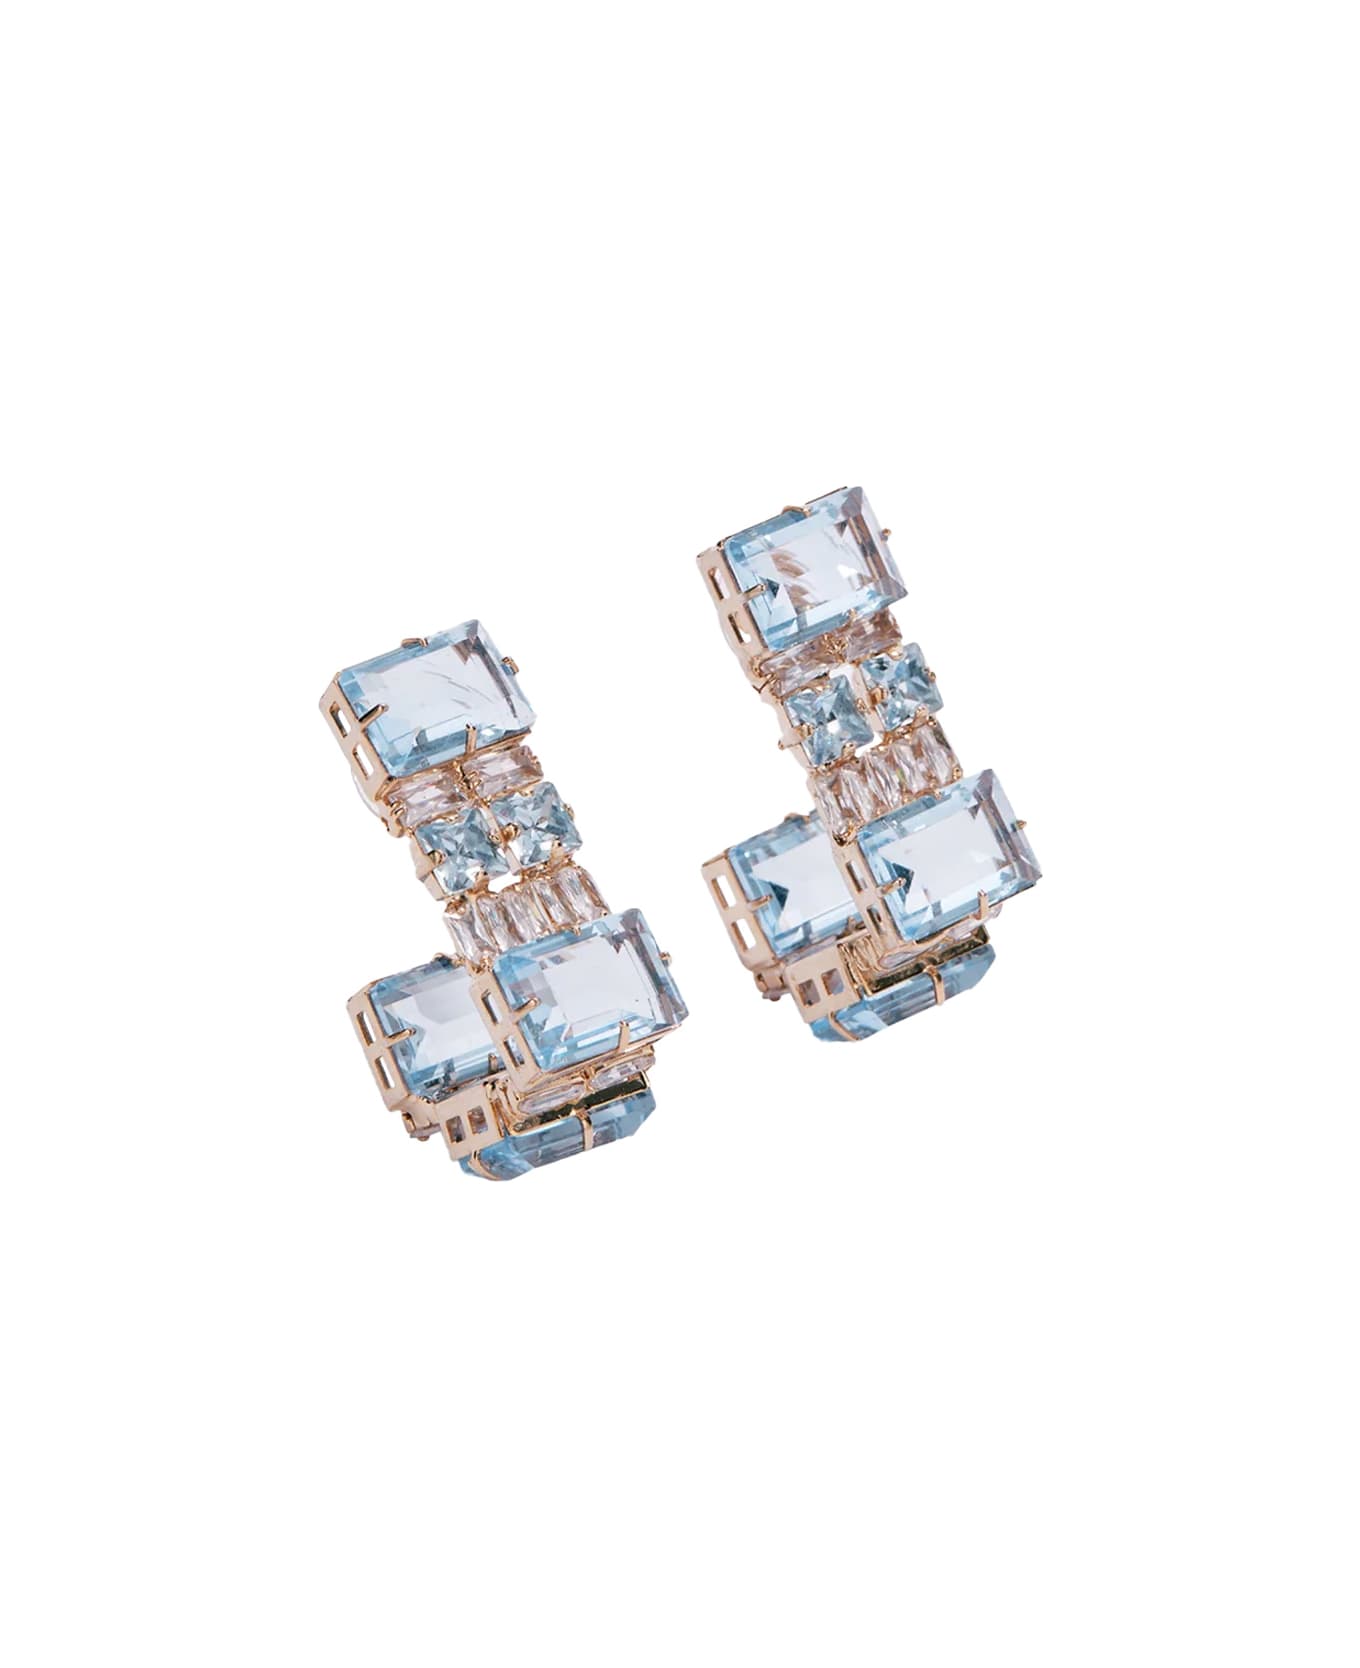 Ermanno Scervino Earrings With Light Blue Stones - Blue イヤリング